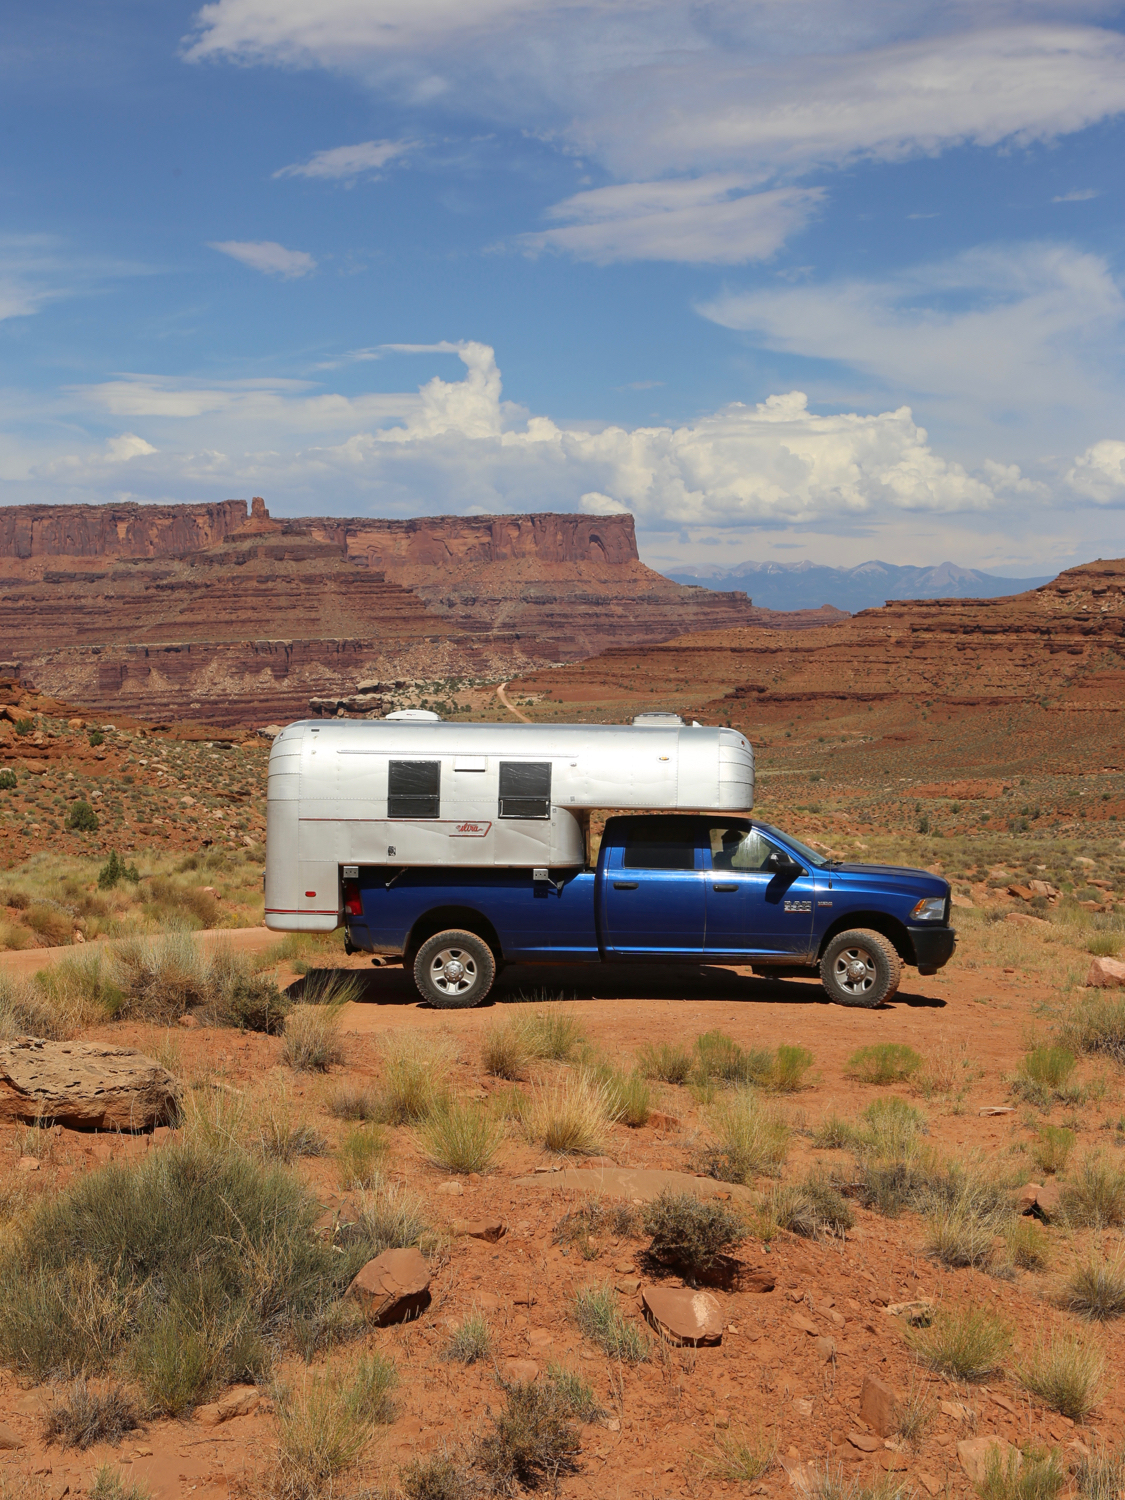 Aluminum truck camper on a blue truck on a dirt road in the middle of Canyonlands National Park